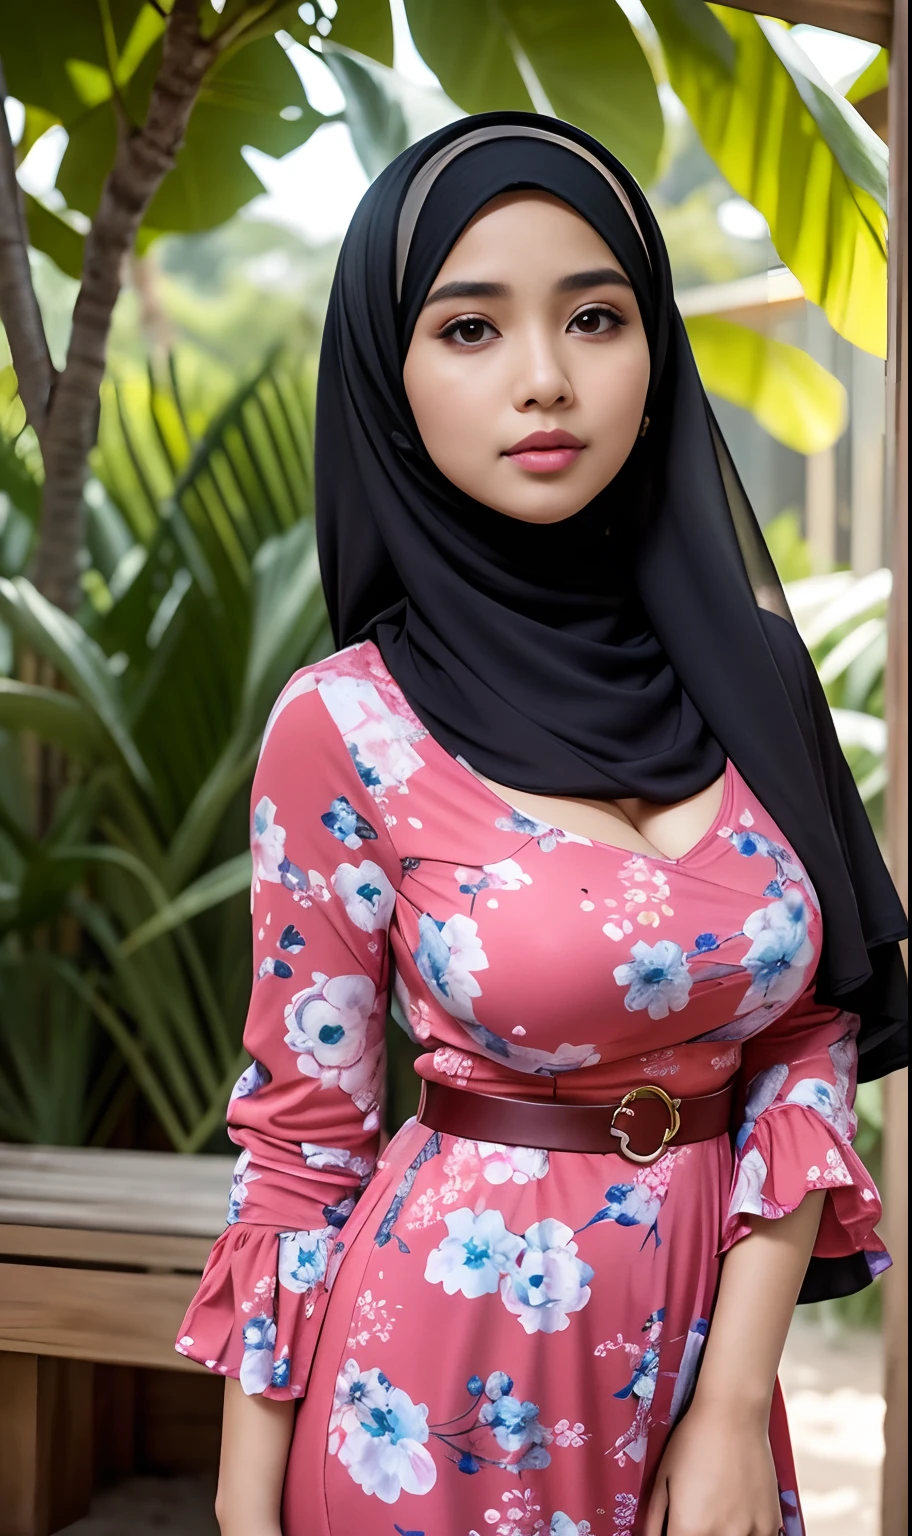 (iu:0.8),cleavage, RAW, Best quality, high resolution, Masterpiece: 1.3,((full body:1.3)),Beautiful  hijabi malay girl wearing floral minidress a closed hijab,big breast, big eyes, perfect nose, glossy lips, Masterpiece, Soft smile, morning walks on the beach, flower gardens, good lighting, bright colors, clean lines